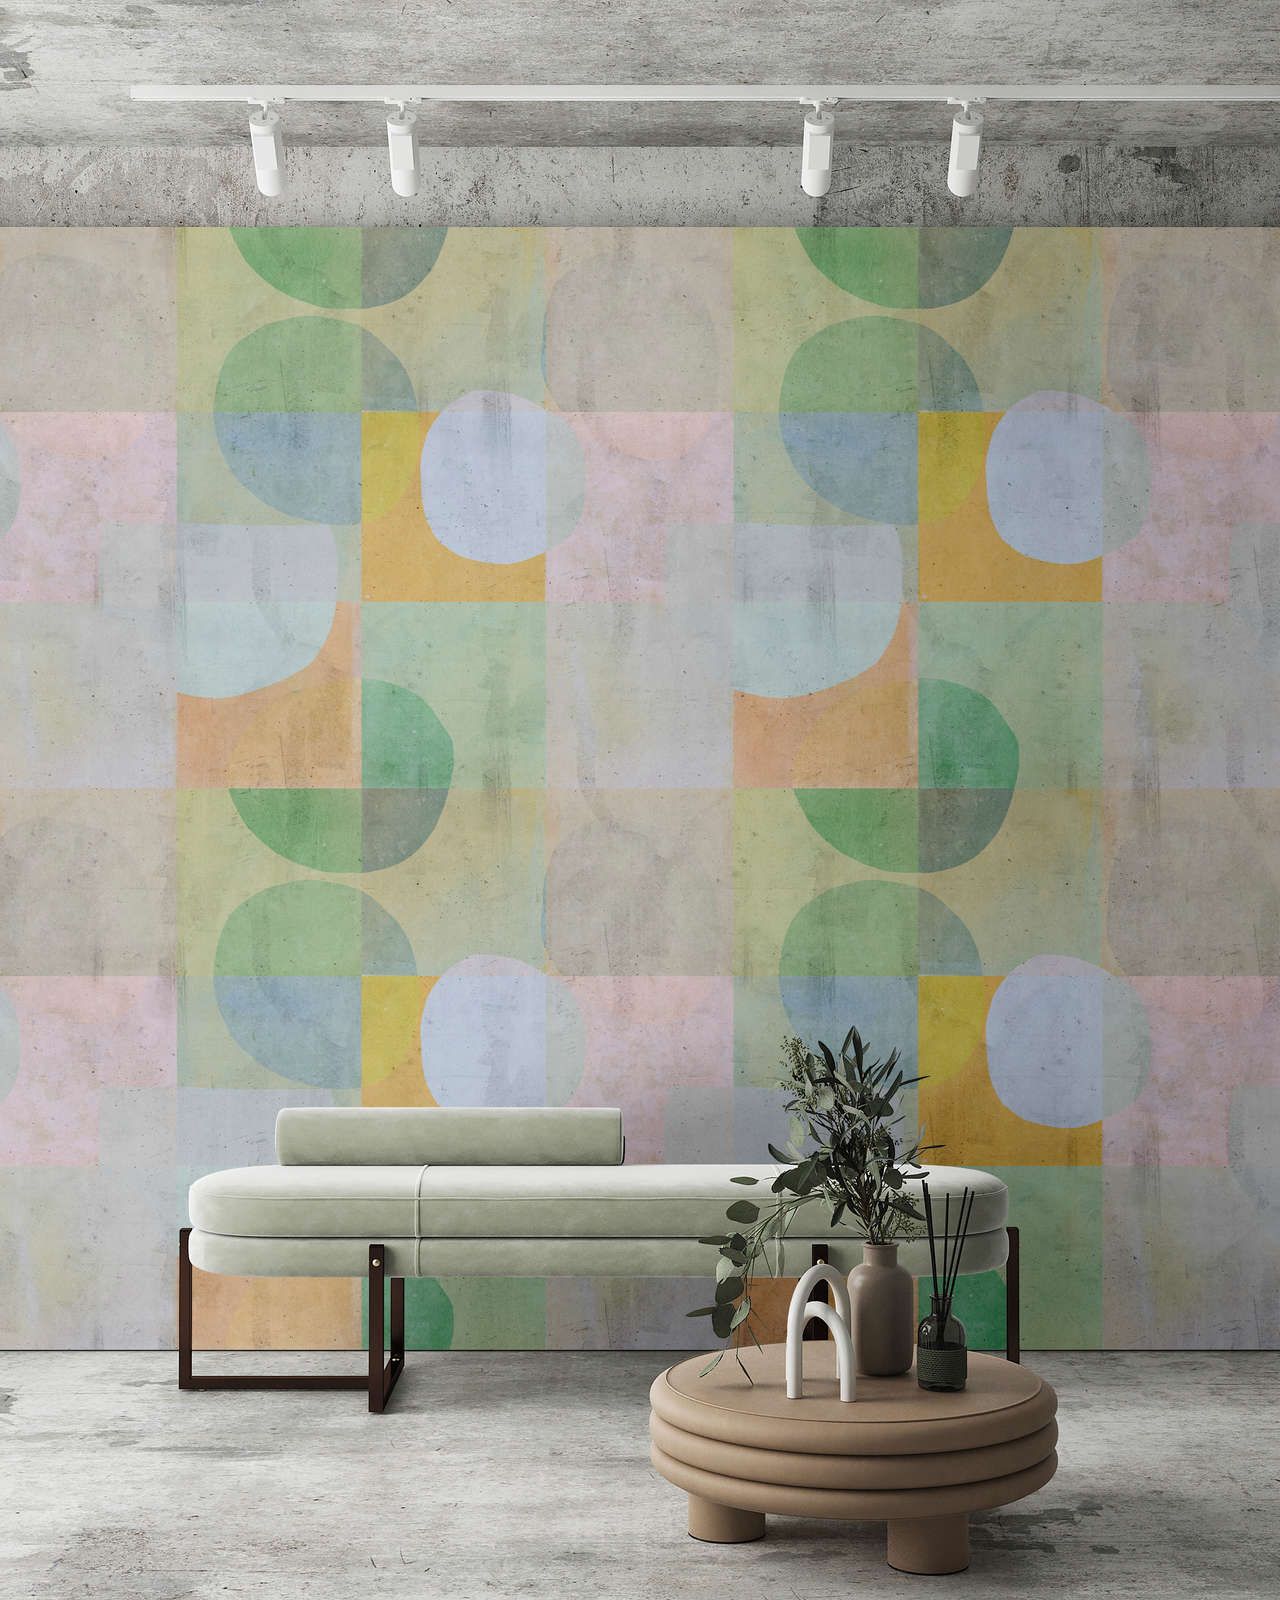             Photo wallpaper »elija 1« - retro pattern in pale colours with concrete look - green, blue, pink | Smooth, slightly shiny premium non-woven fabric
        